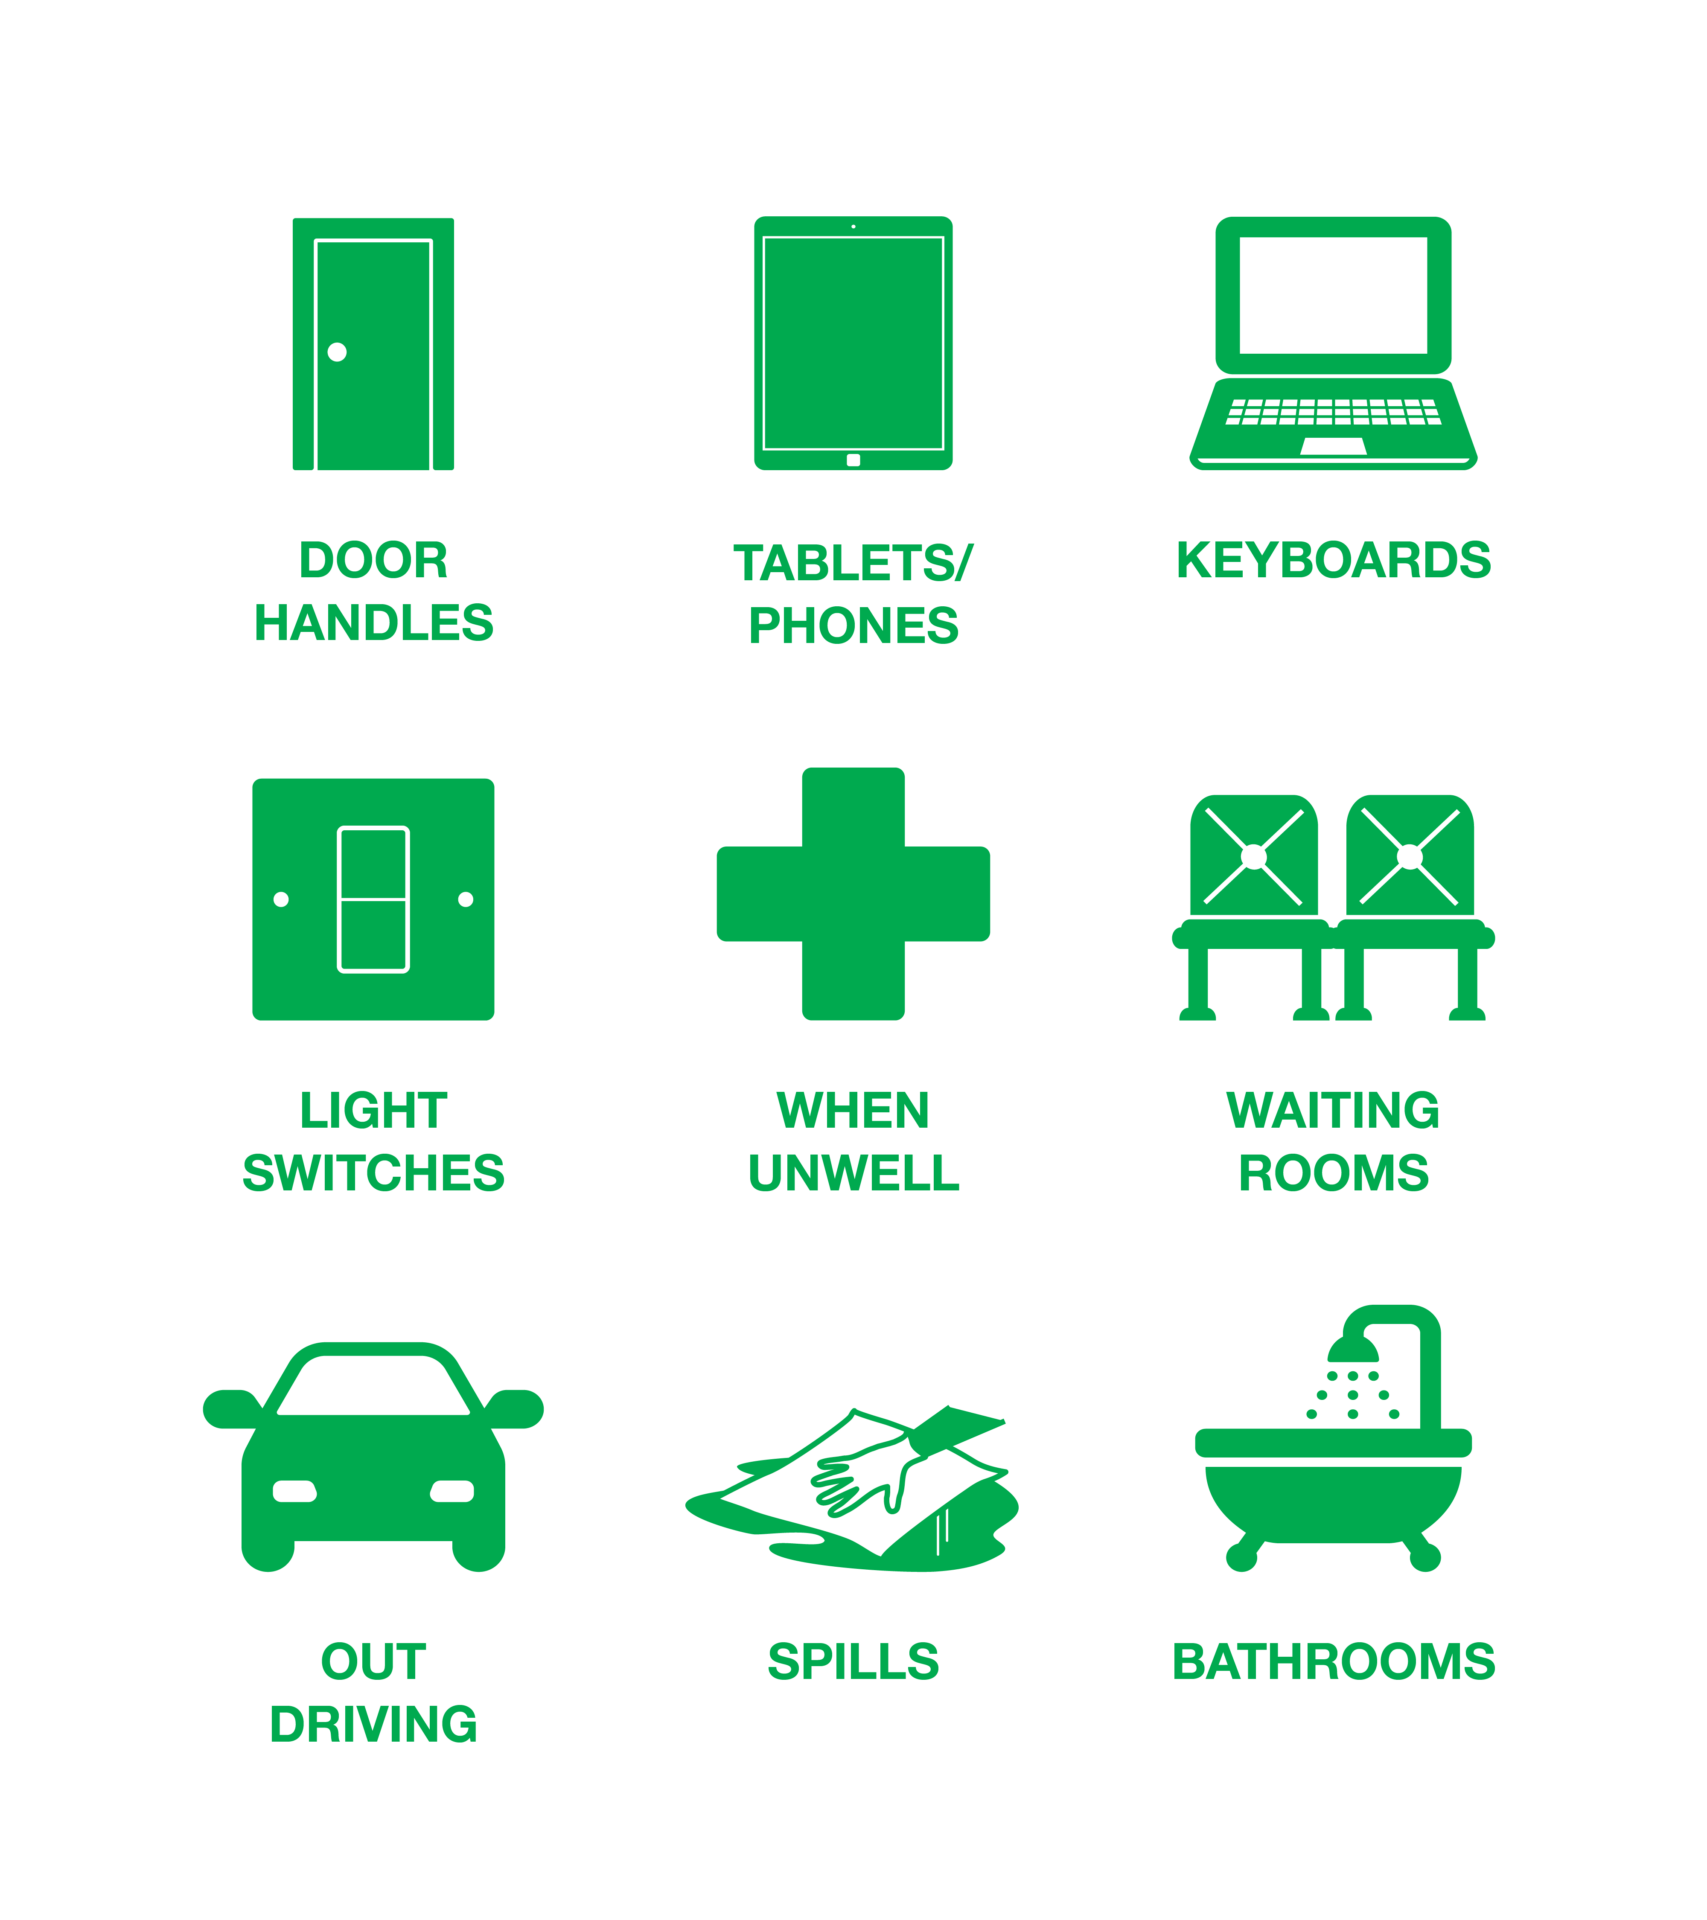 Surfaces_and_Equipment_icons_v2